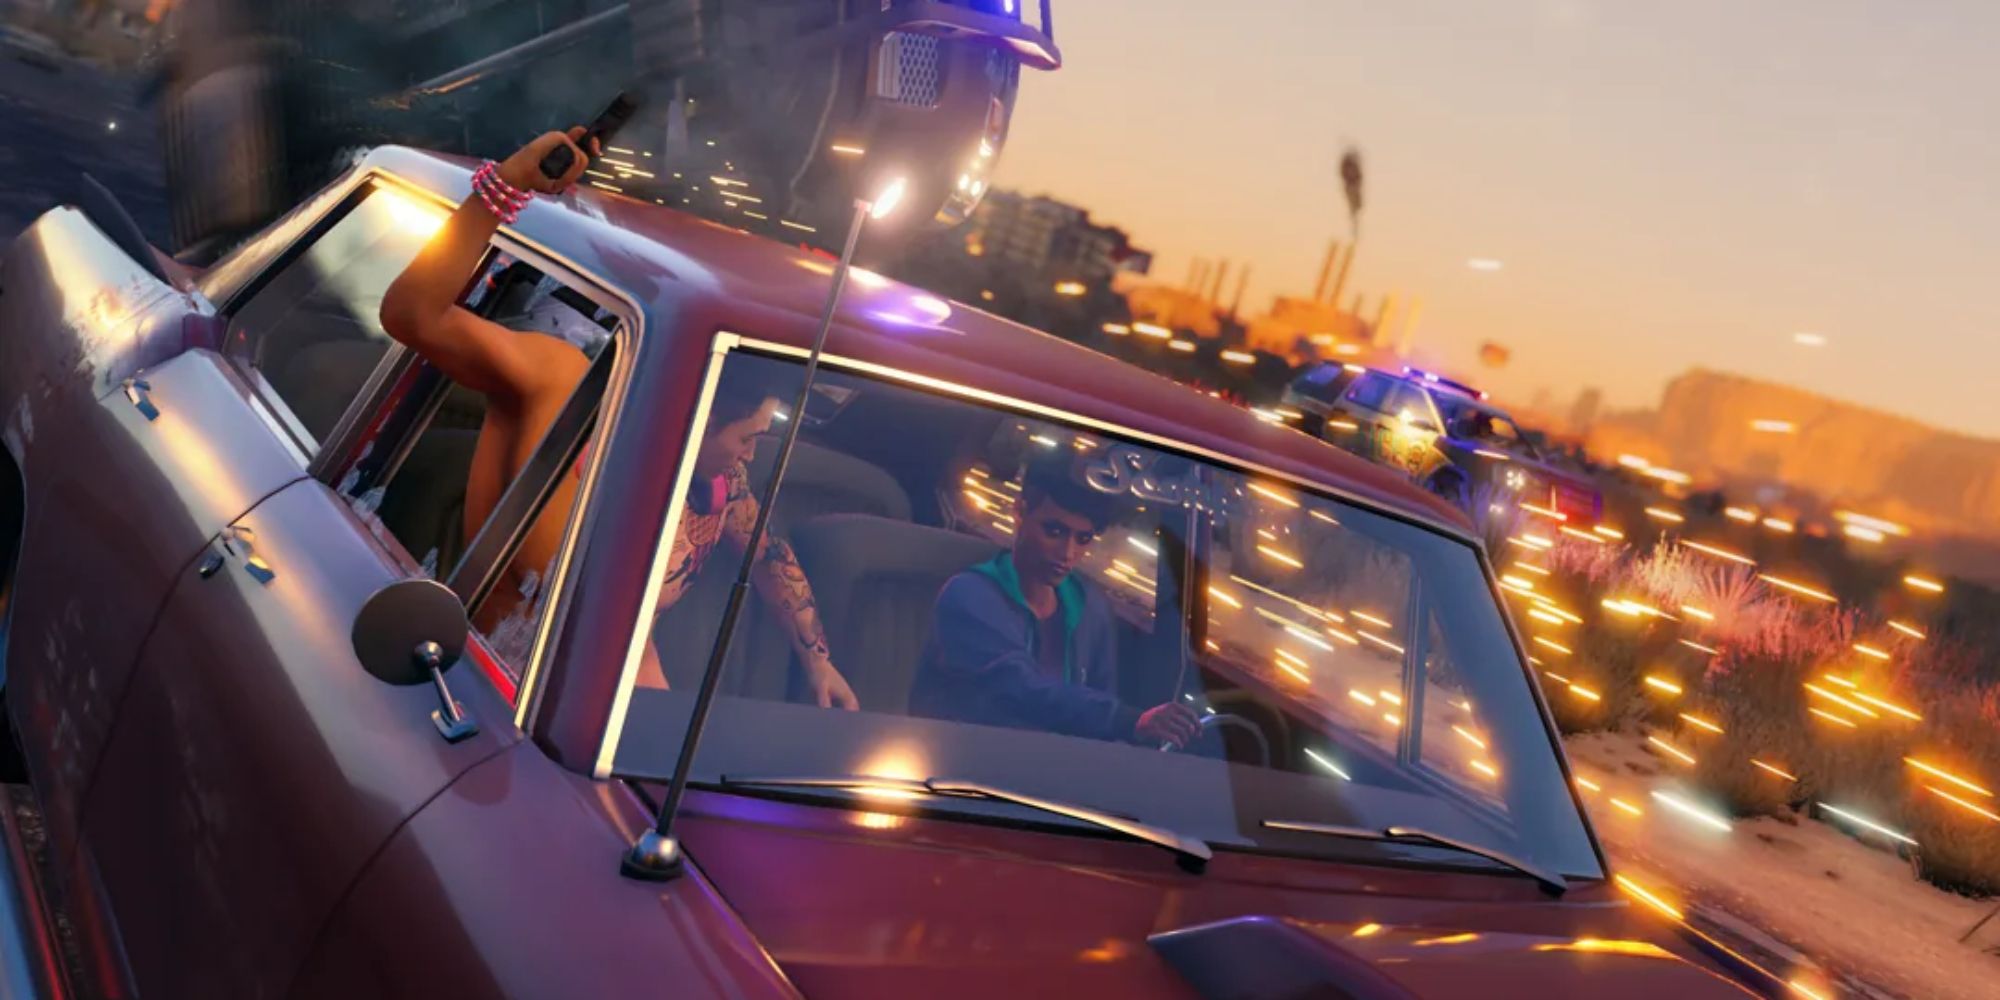 Saints Row Screenshot Of Boss and Kev riding away in a car from police and holding gun out of the car window.